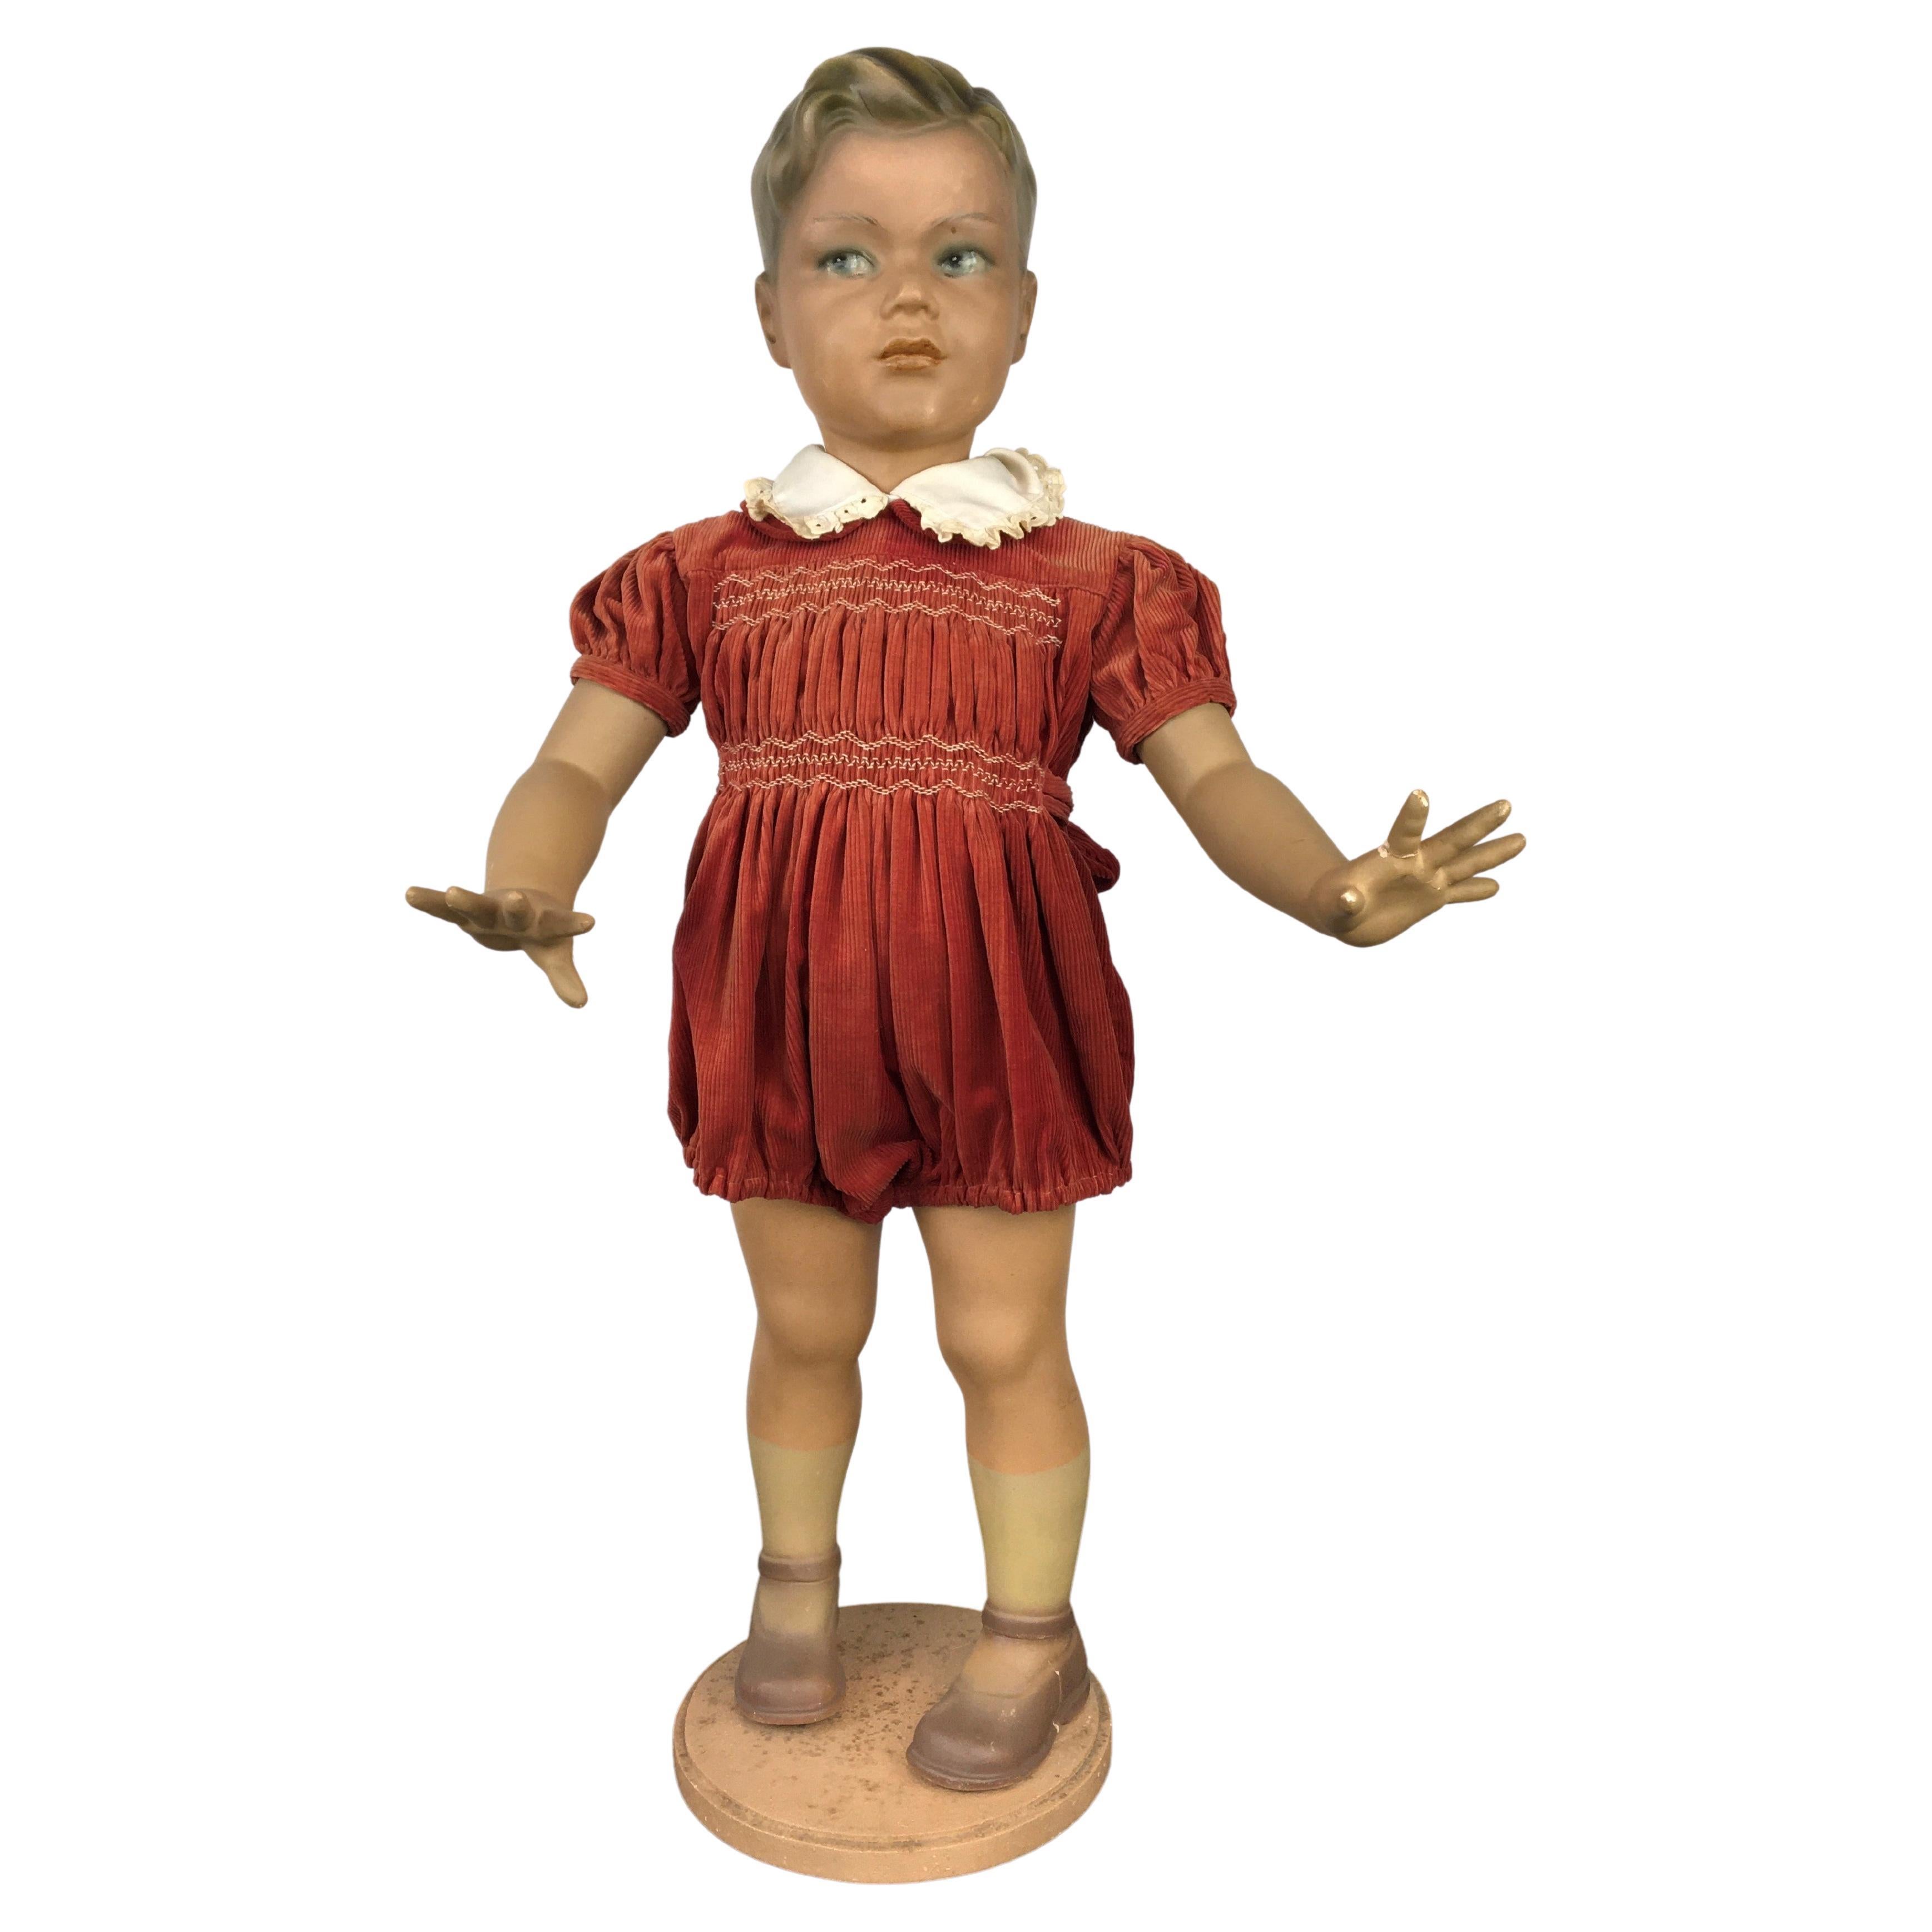 Store Display Boy Doll, Child Mannequin For Sale